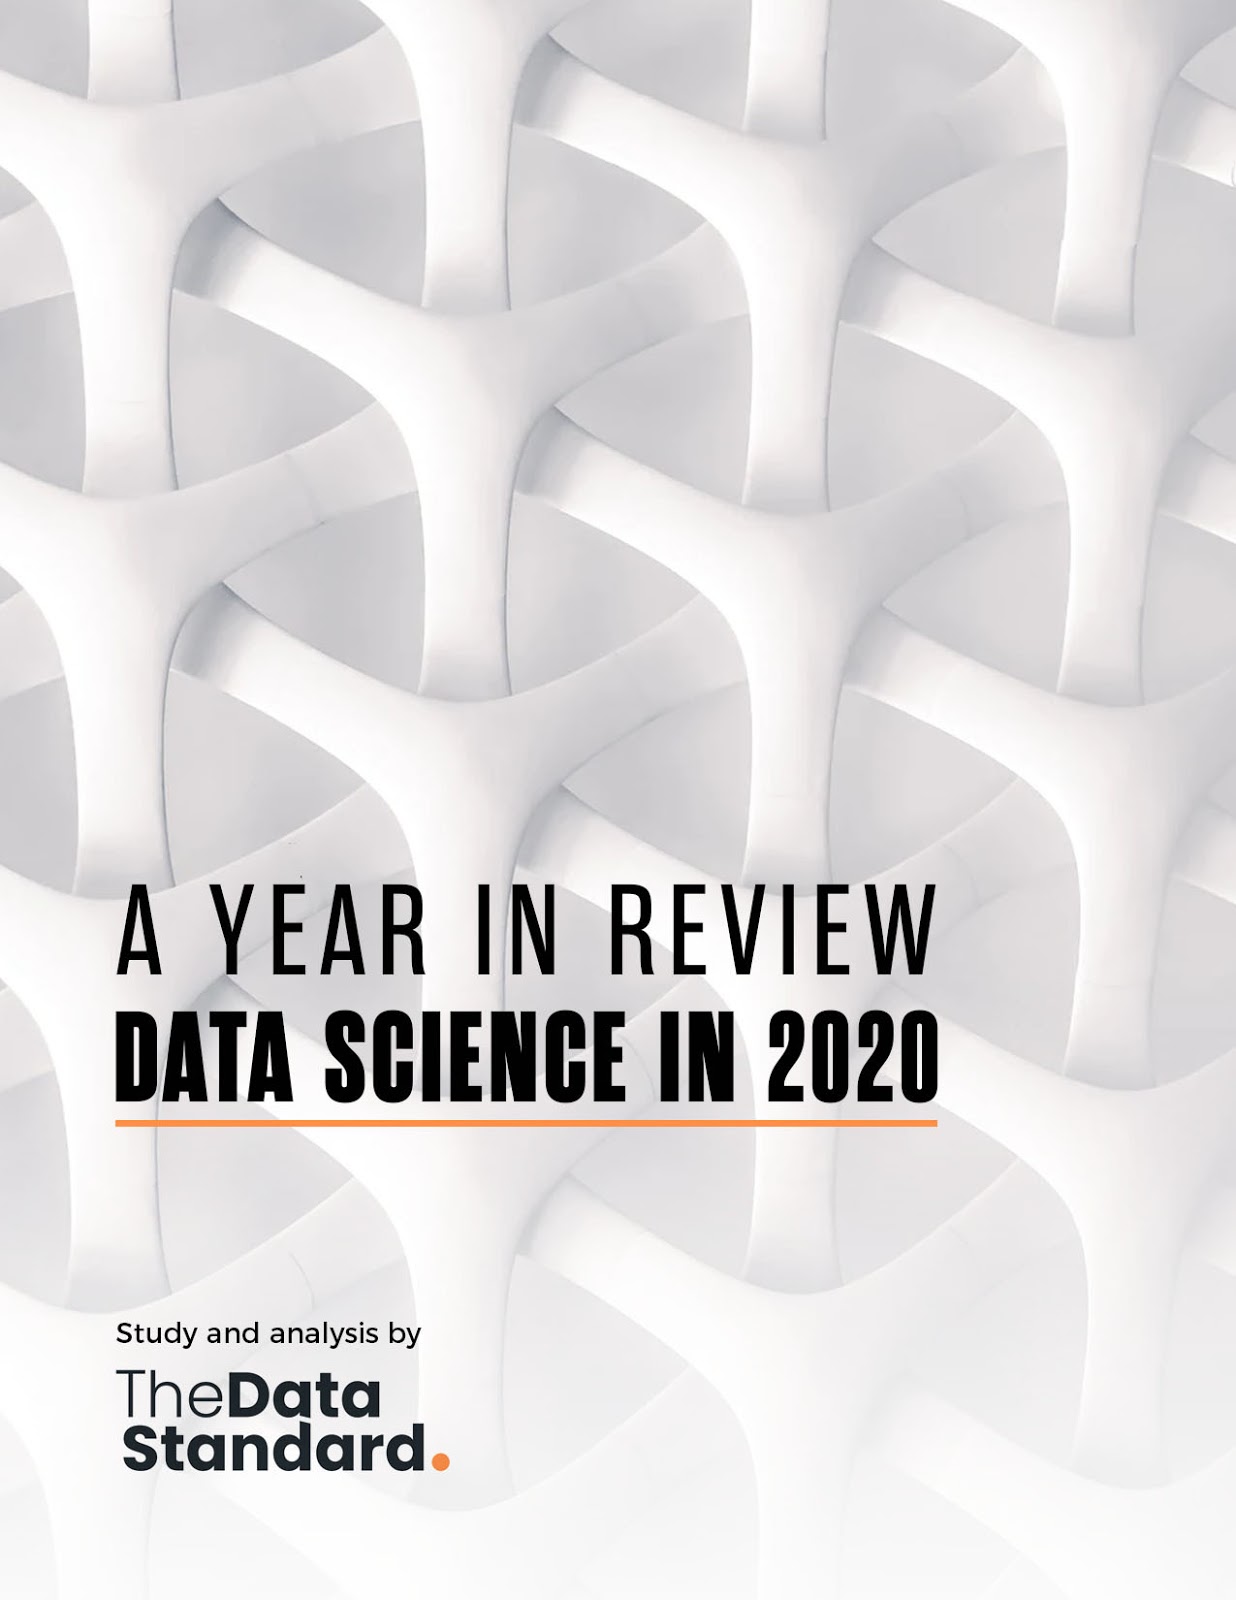 A Year In Review, Data Science in 2020